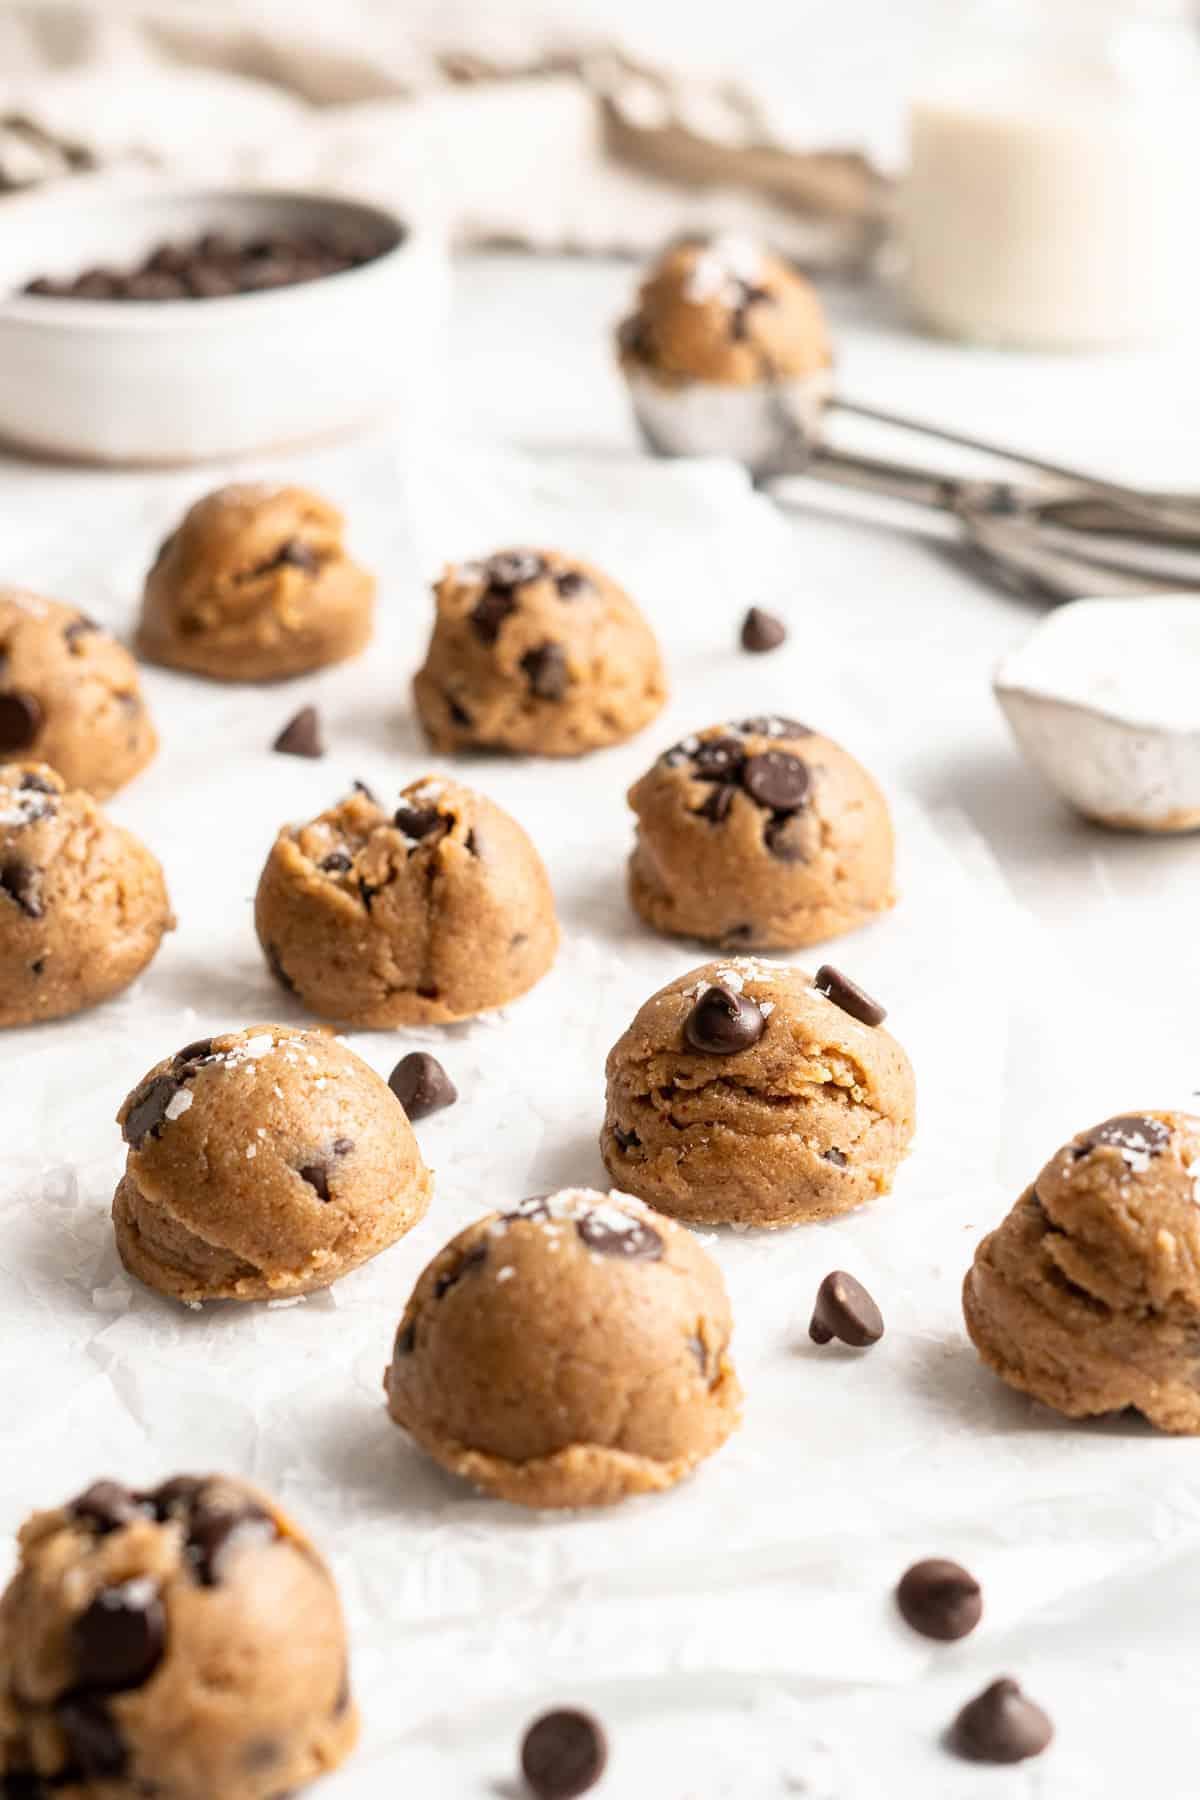 Vegan cookie dough balls on parchment paper with chocolate chips scattered between